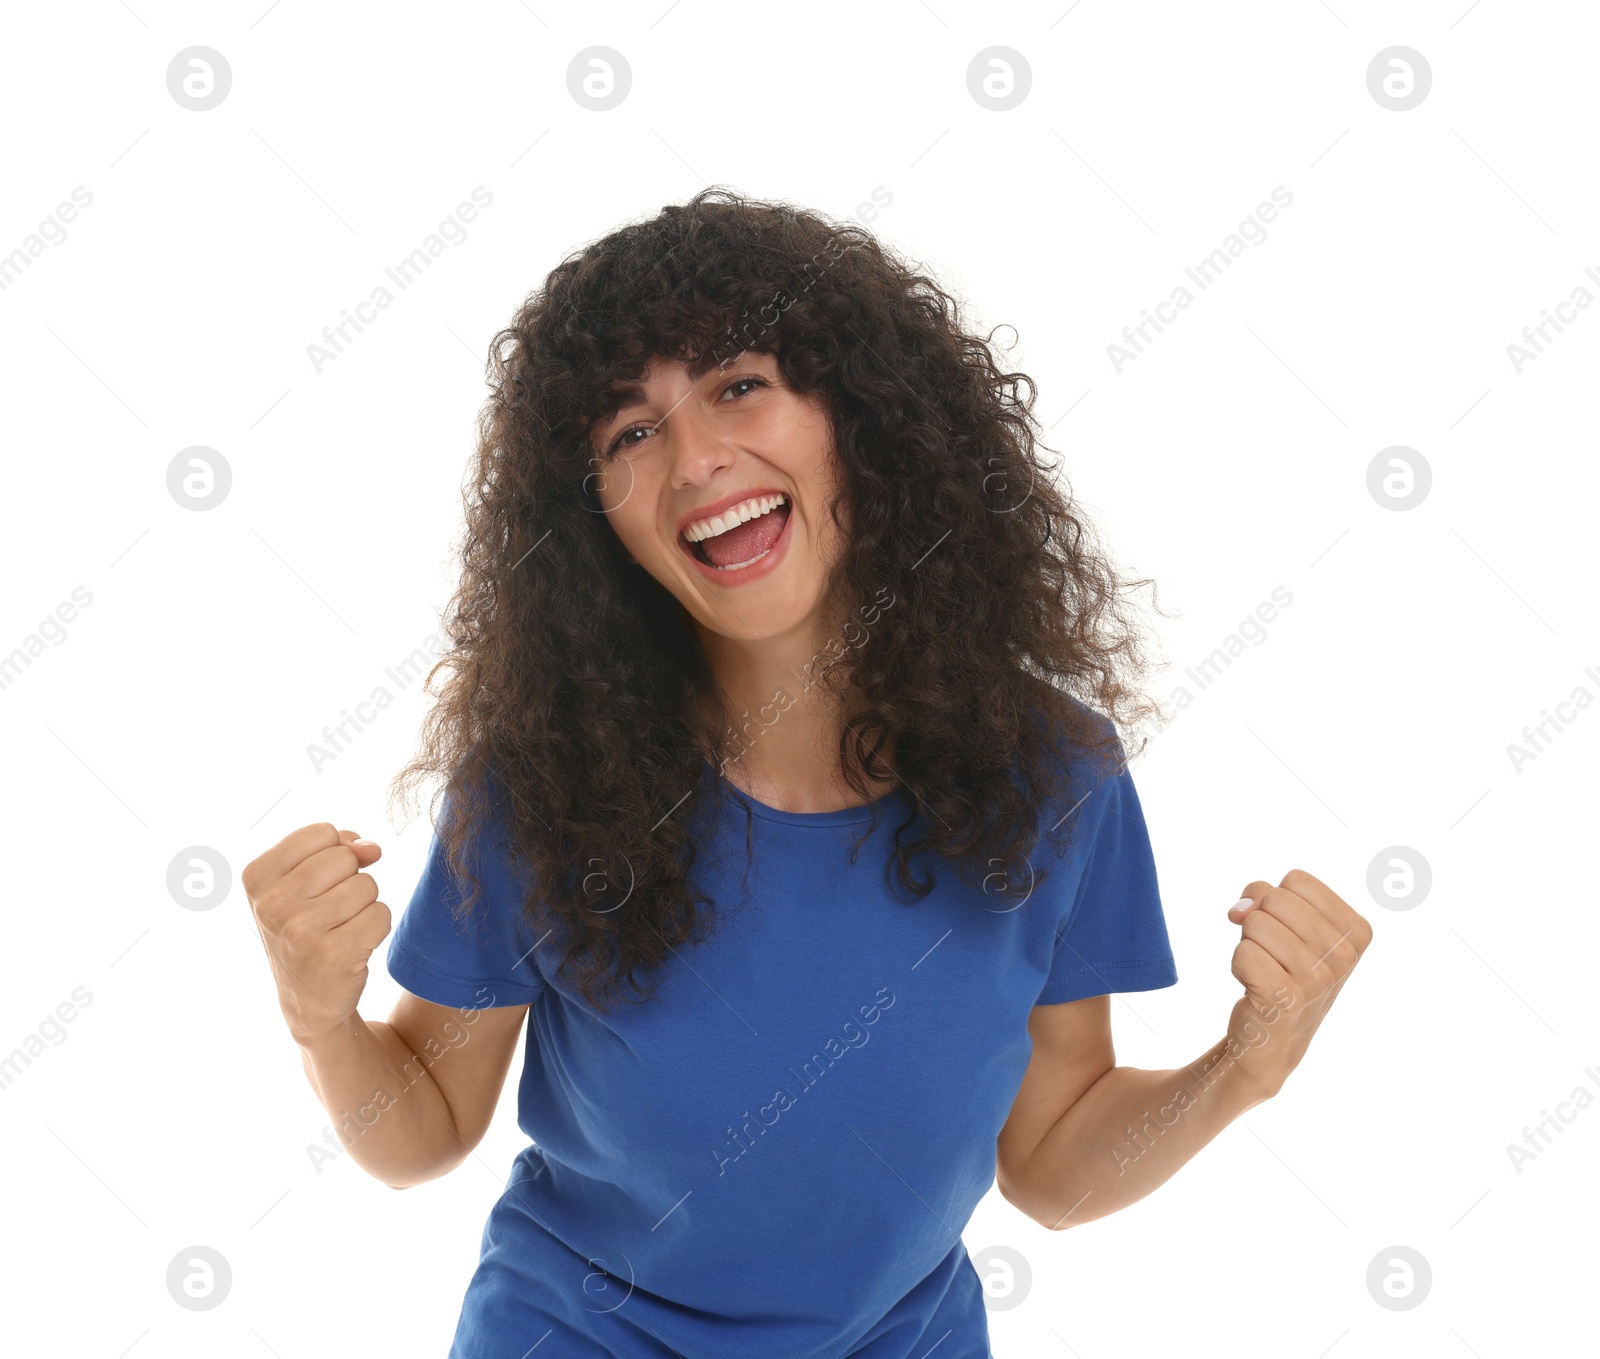 Photo of Excited young sports fan isolated on white